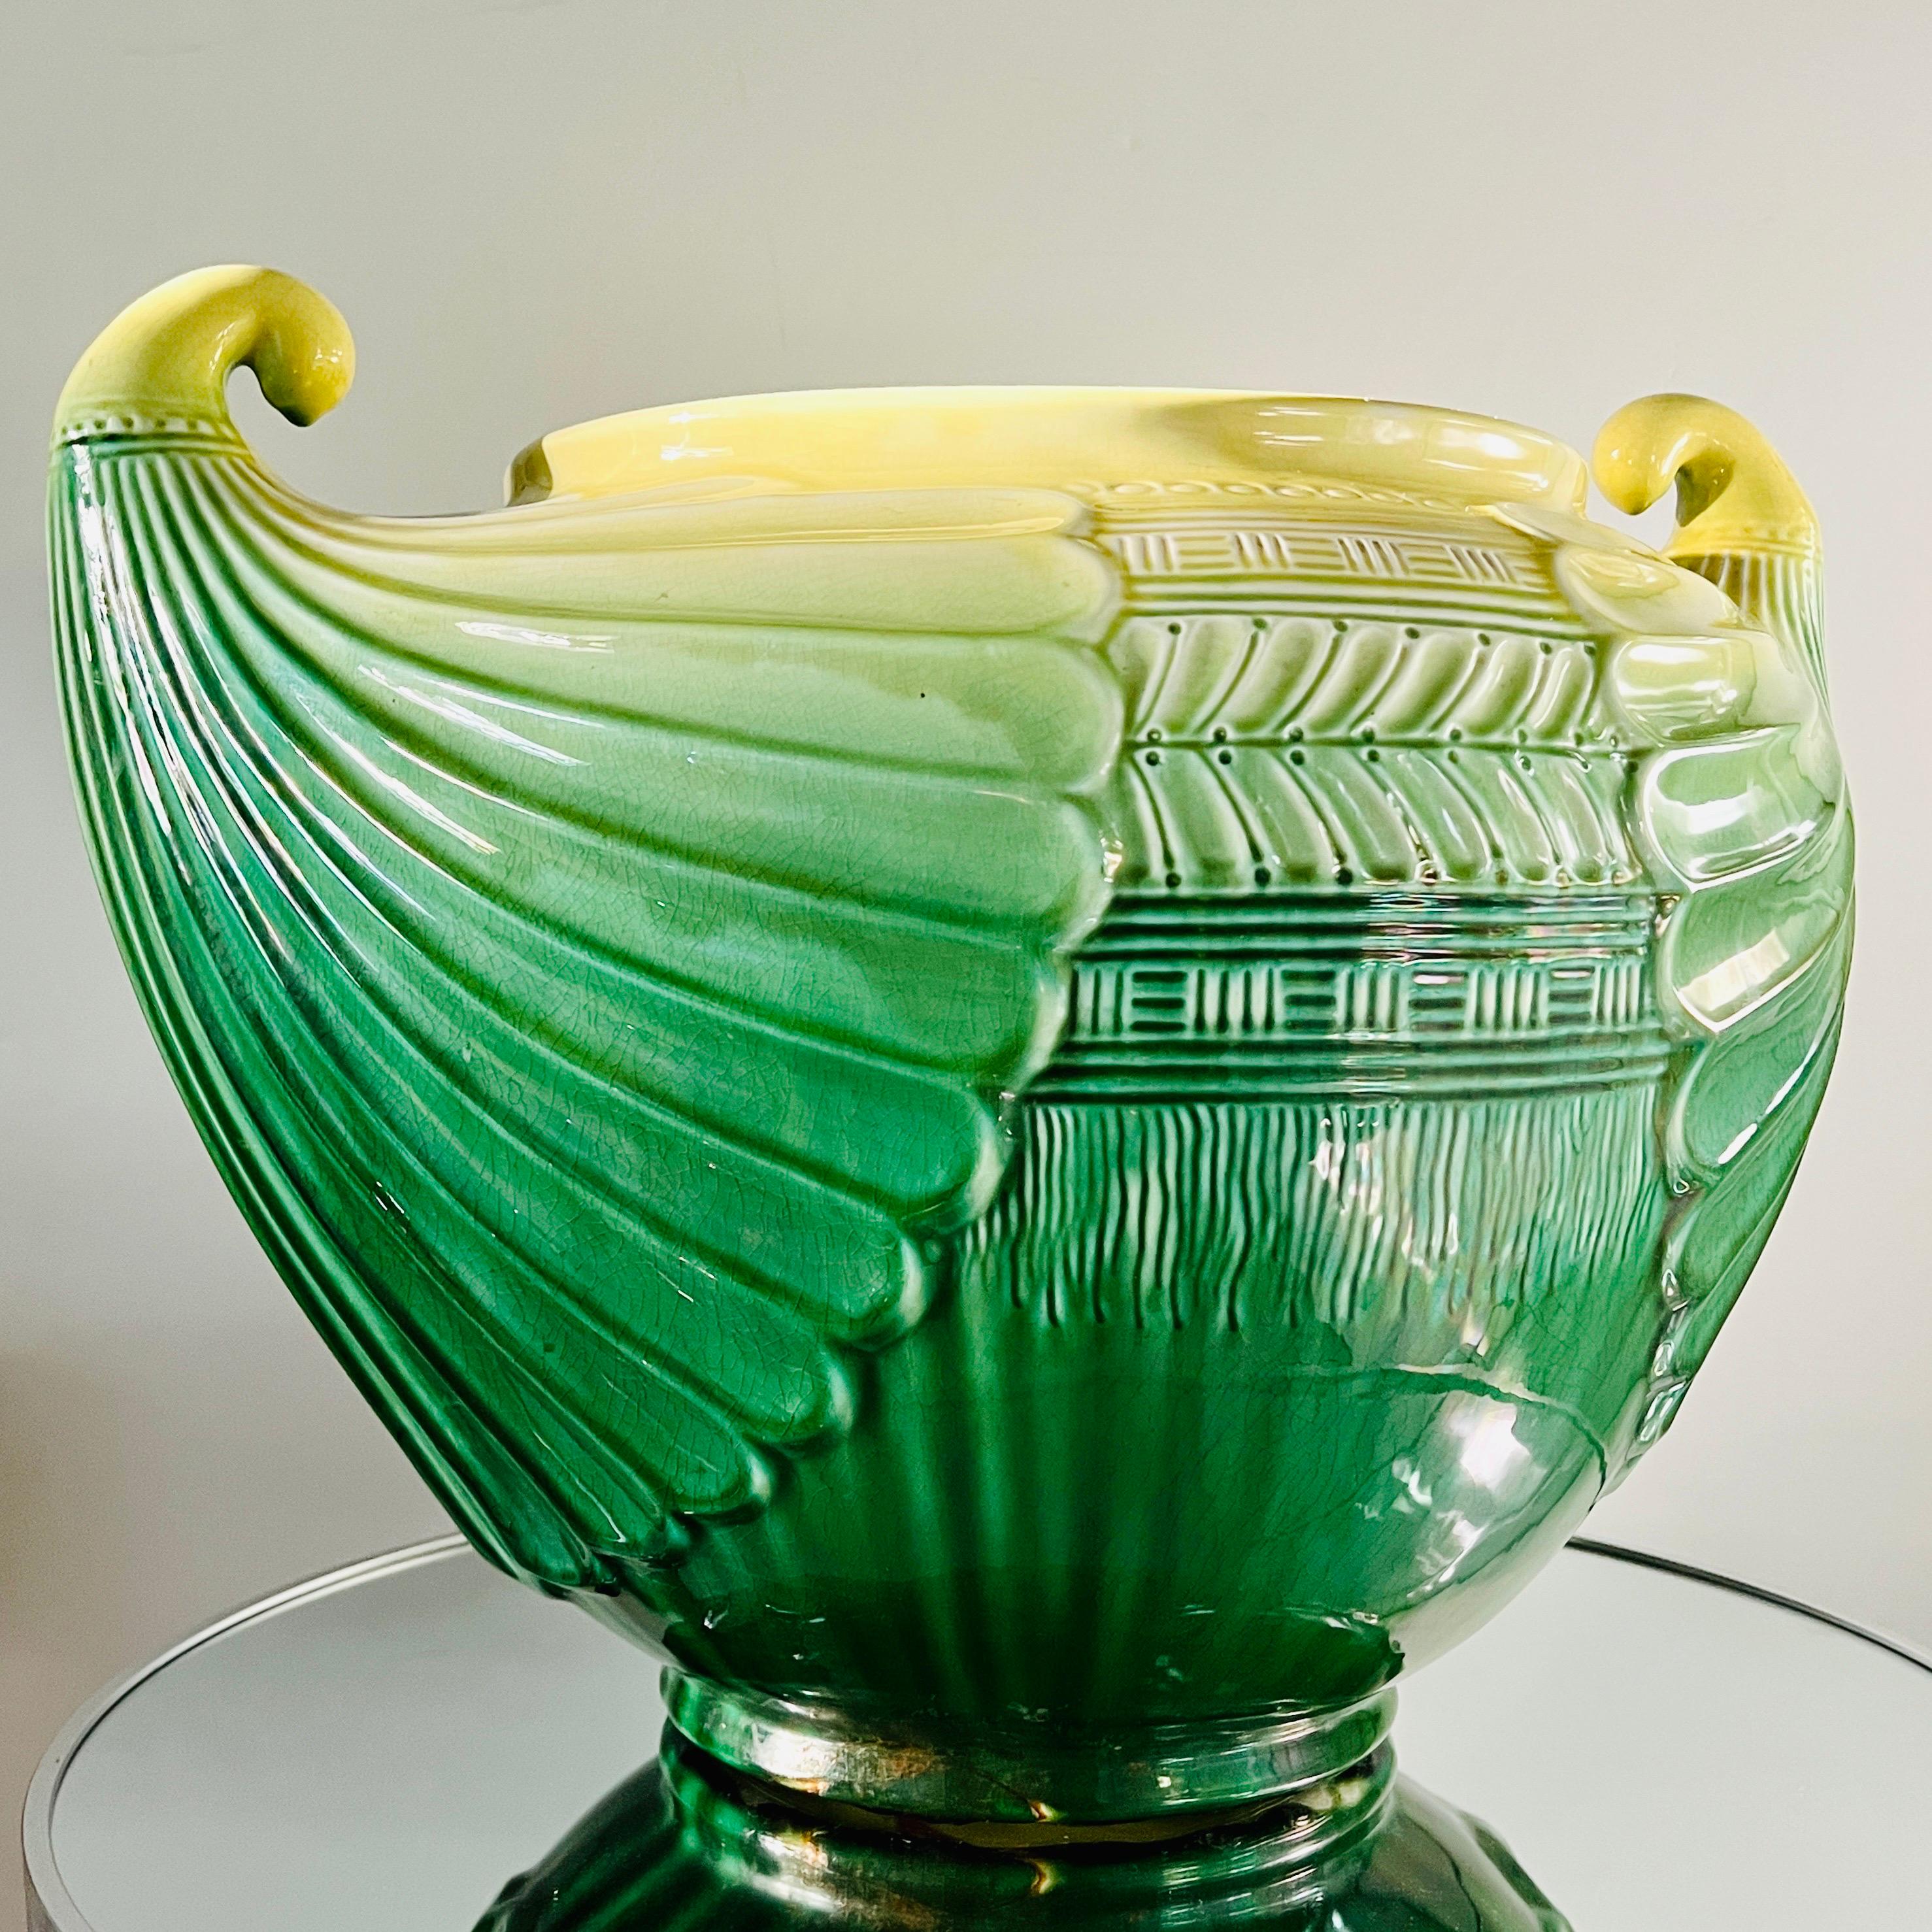 Italian Art Nouveau Ceramic Cachepot in Green and Yellow by SCI Laveno, Italy c. 1910